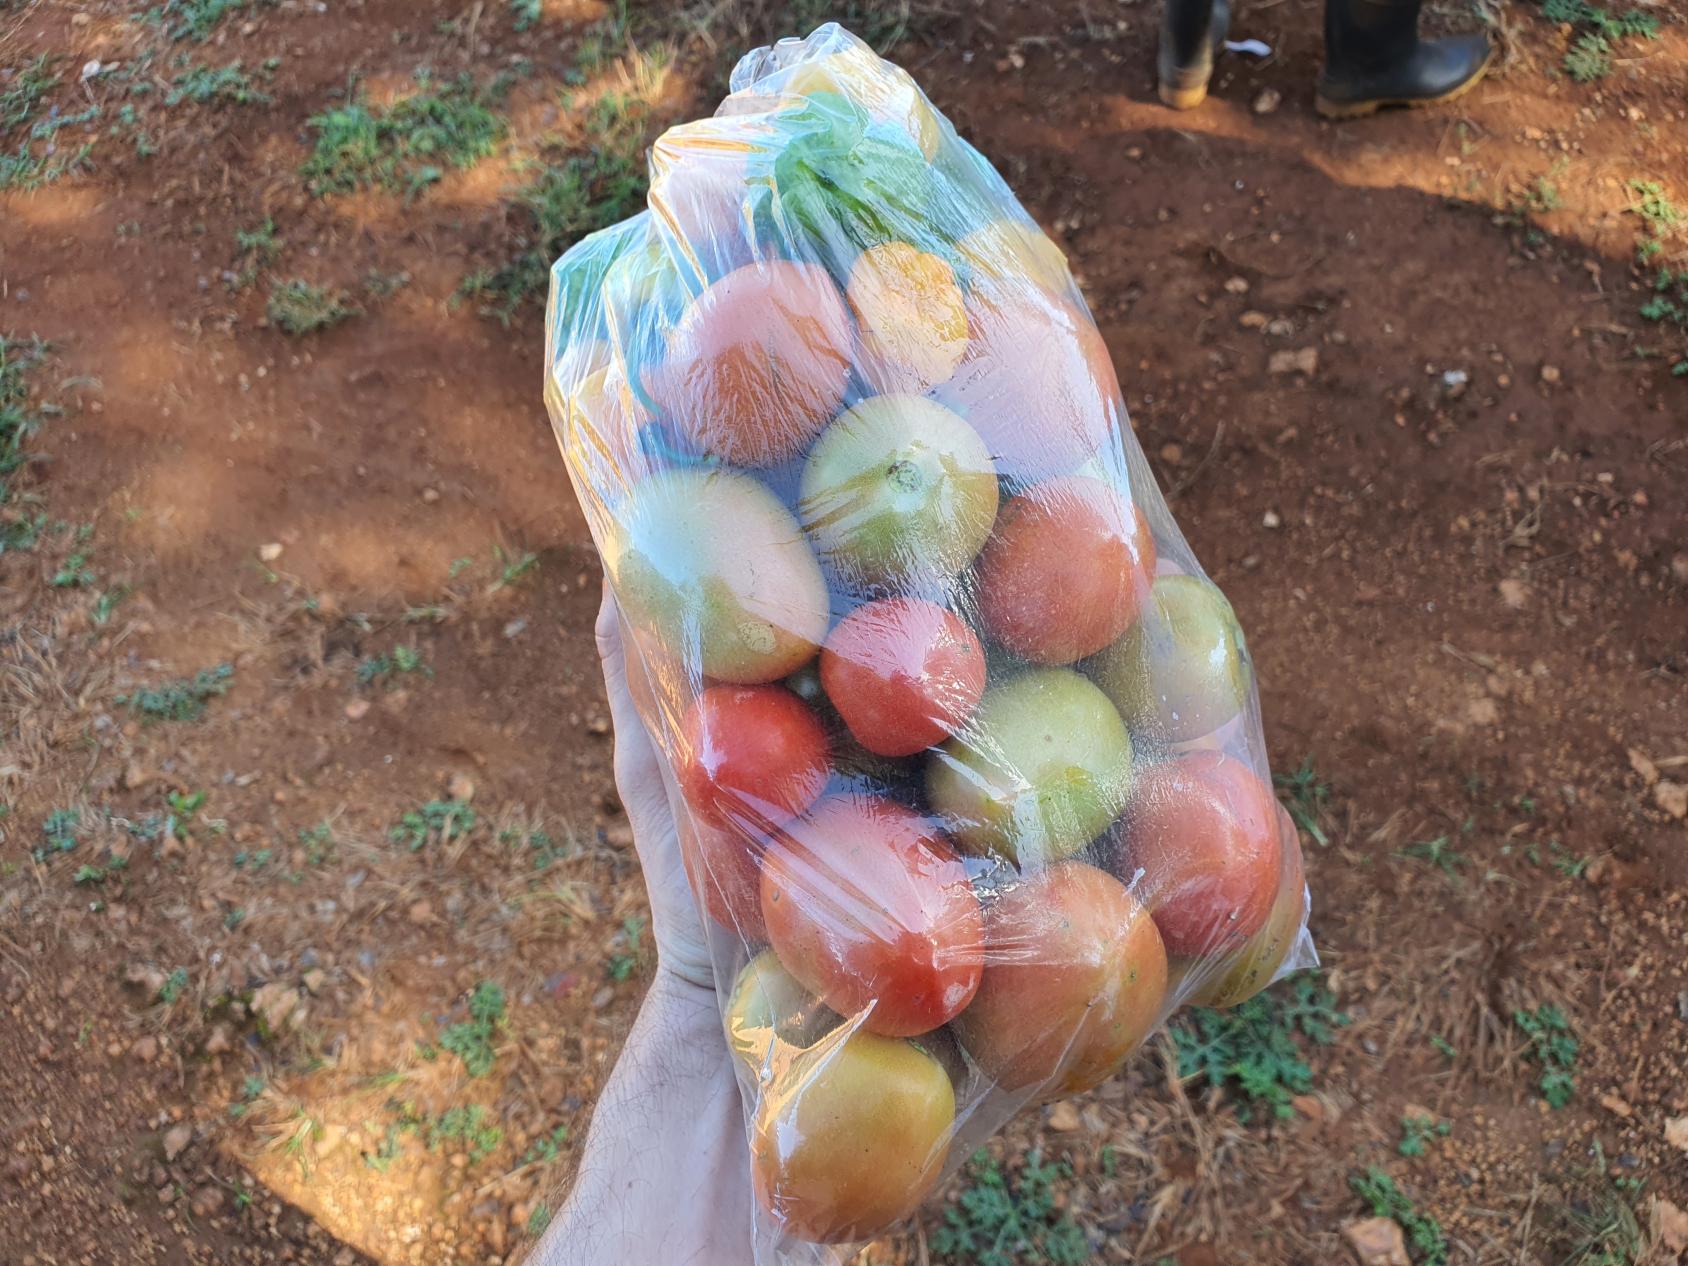 A hand holding a bag full of tomatoes and other fruits.